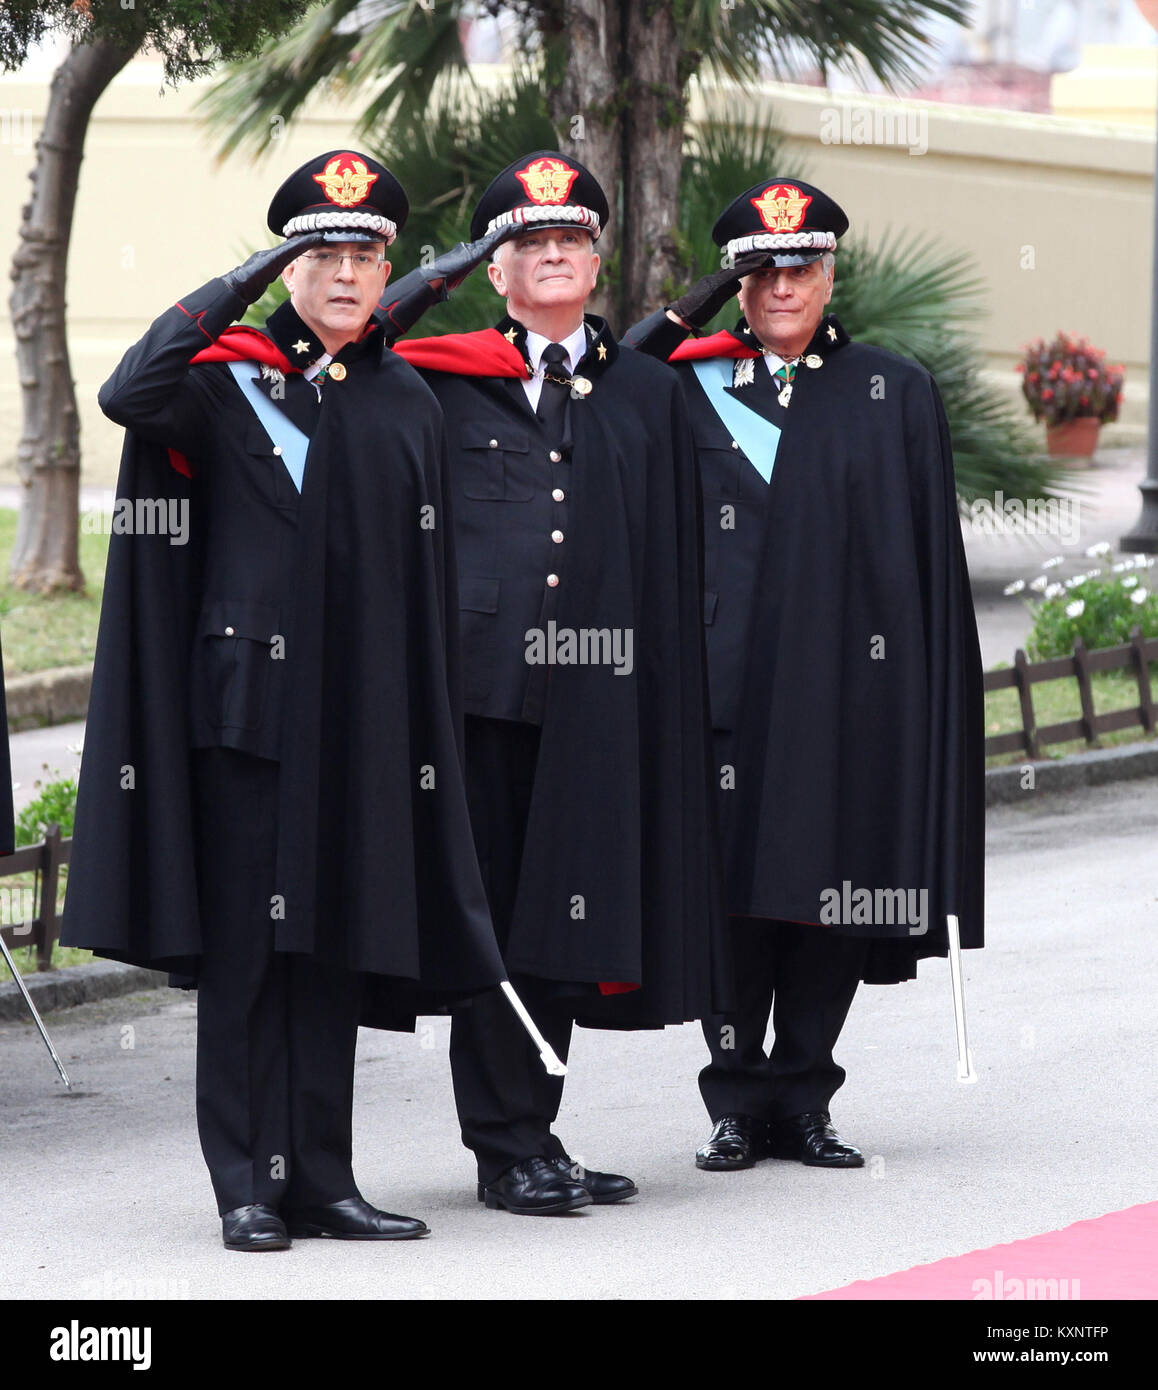 January 11, 2018 - the general commander of the firearms of the Carabinieri Tullio Del Sette, together with the Generali Vittori Tommasone and Giovanni Nistri during the change of guard at the top of the commandos.Naples, Italy - Naples: change at the top of the ''Ogaden'' Carabinieri Inter-regional Command.This morning was held in Naples the ceremony of rotation of the Commander Carabinieri ''Ogaden''.At the General of the Army Corps Giovanni Nistri, Commander of the Summit from 6 April 2016, the paratroop Vittorio Tomasone takes over. General Nistri leaves, after 21 months, the Interregio Stock Photo